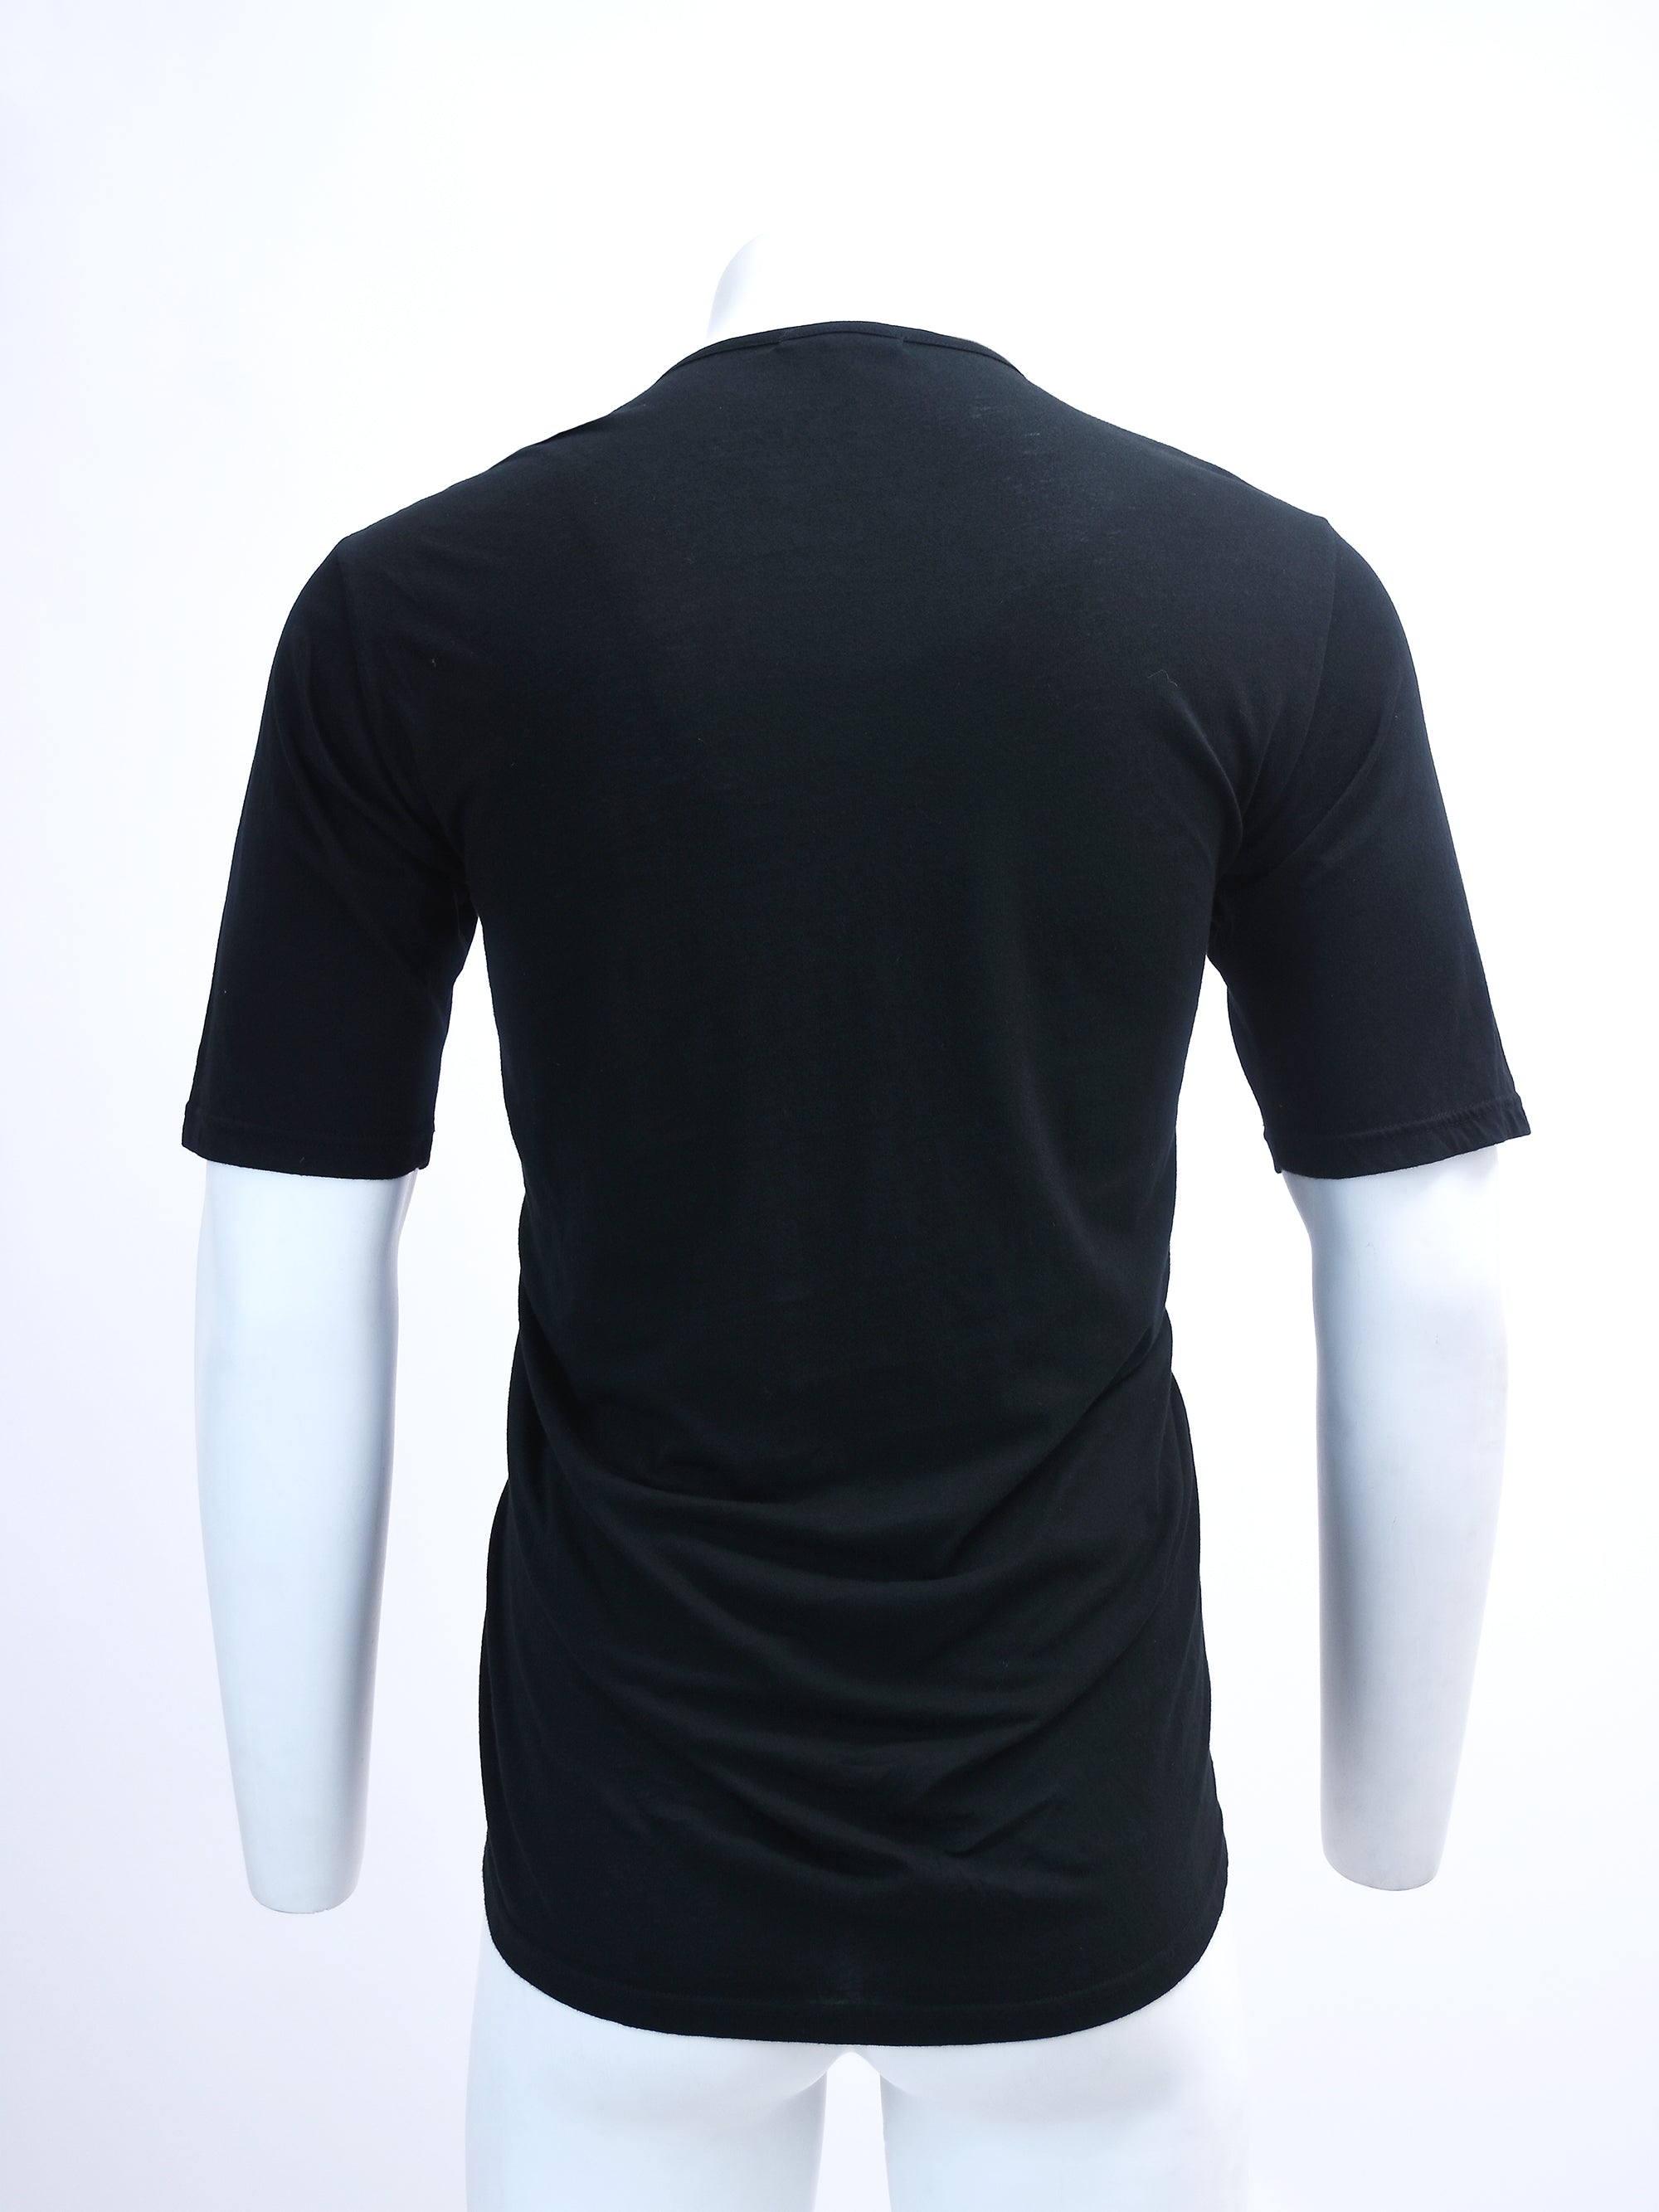 BLACK T-SHIRT WITH FAUX LEATHER LAYER